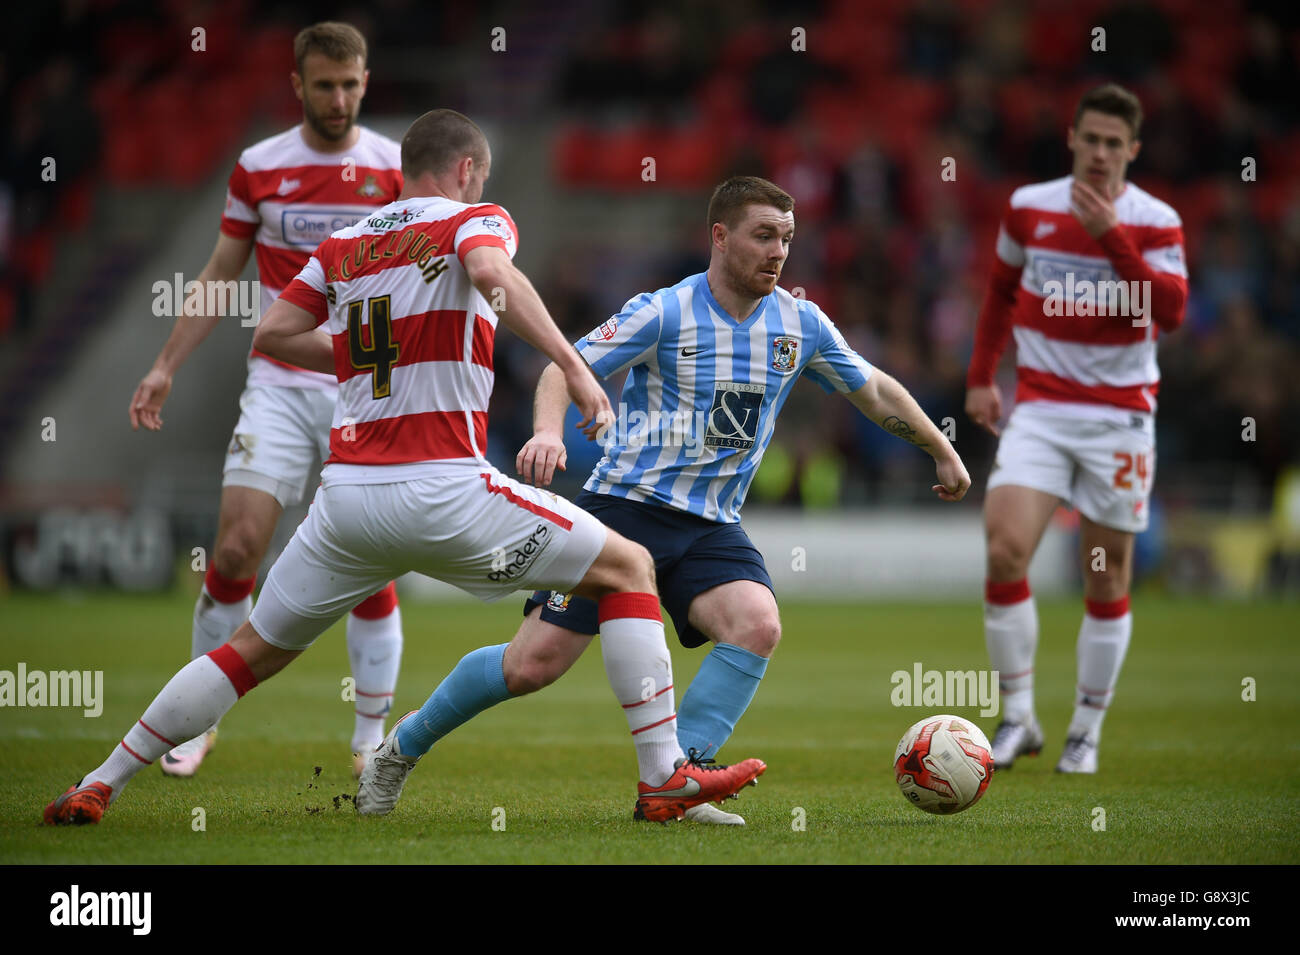 Doncaster Rovers' Luke McCullough challenges Coventry City's John Fleck (centre) Stock Photo